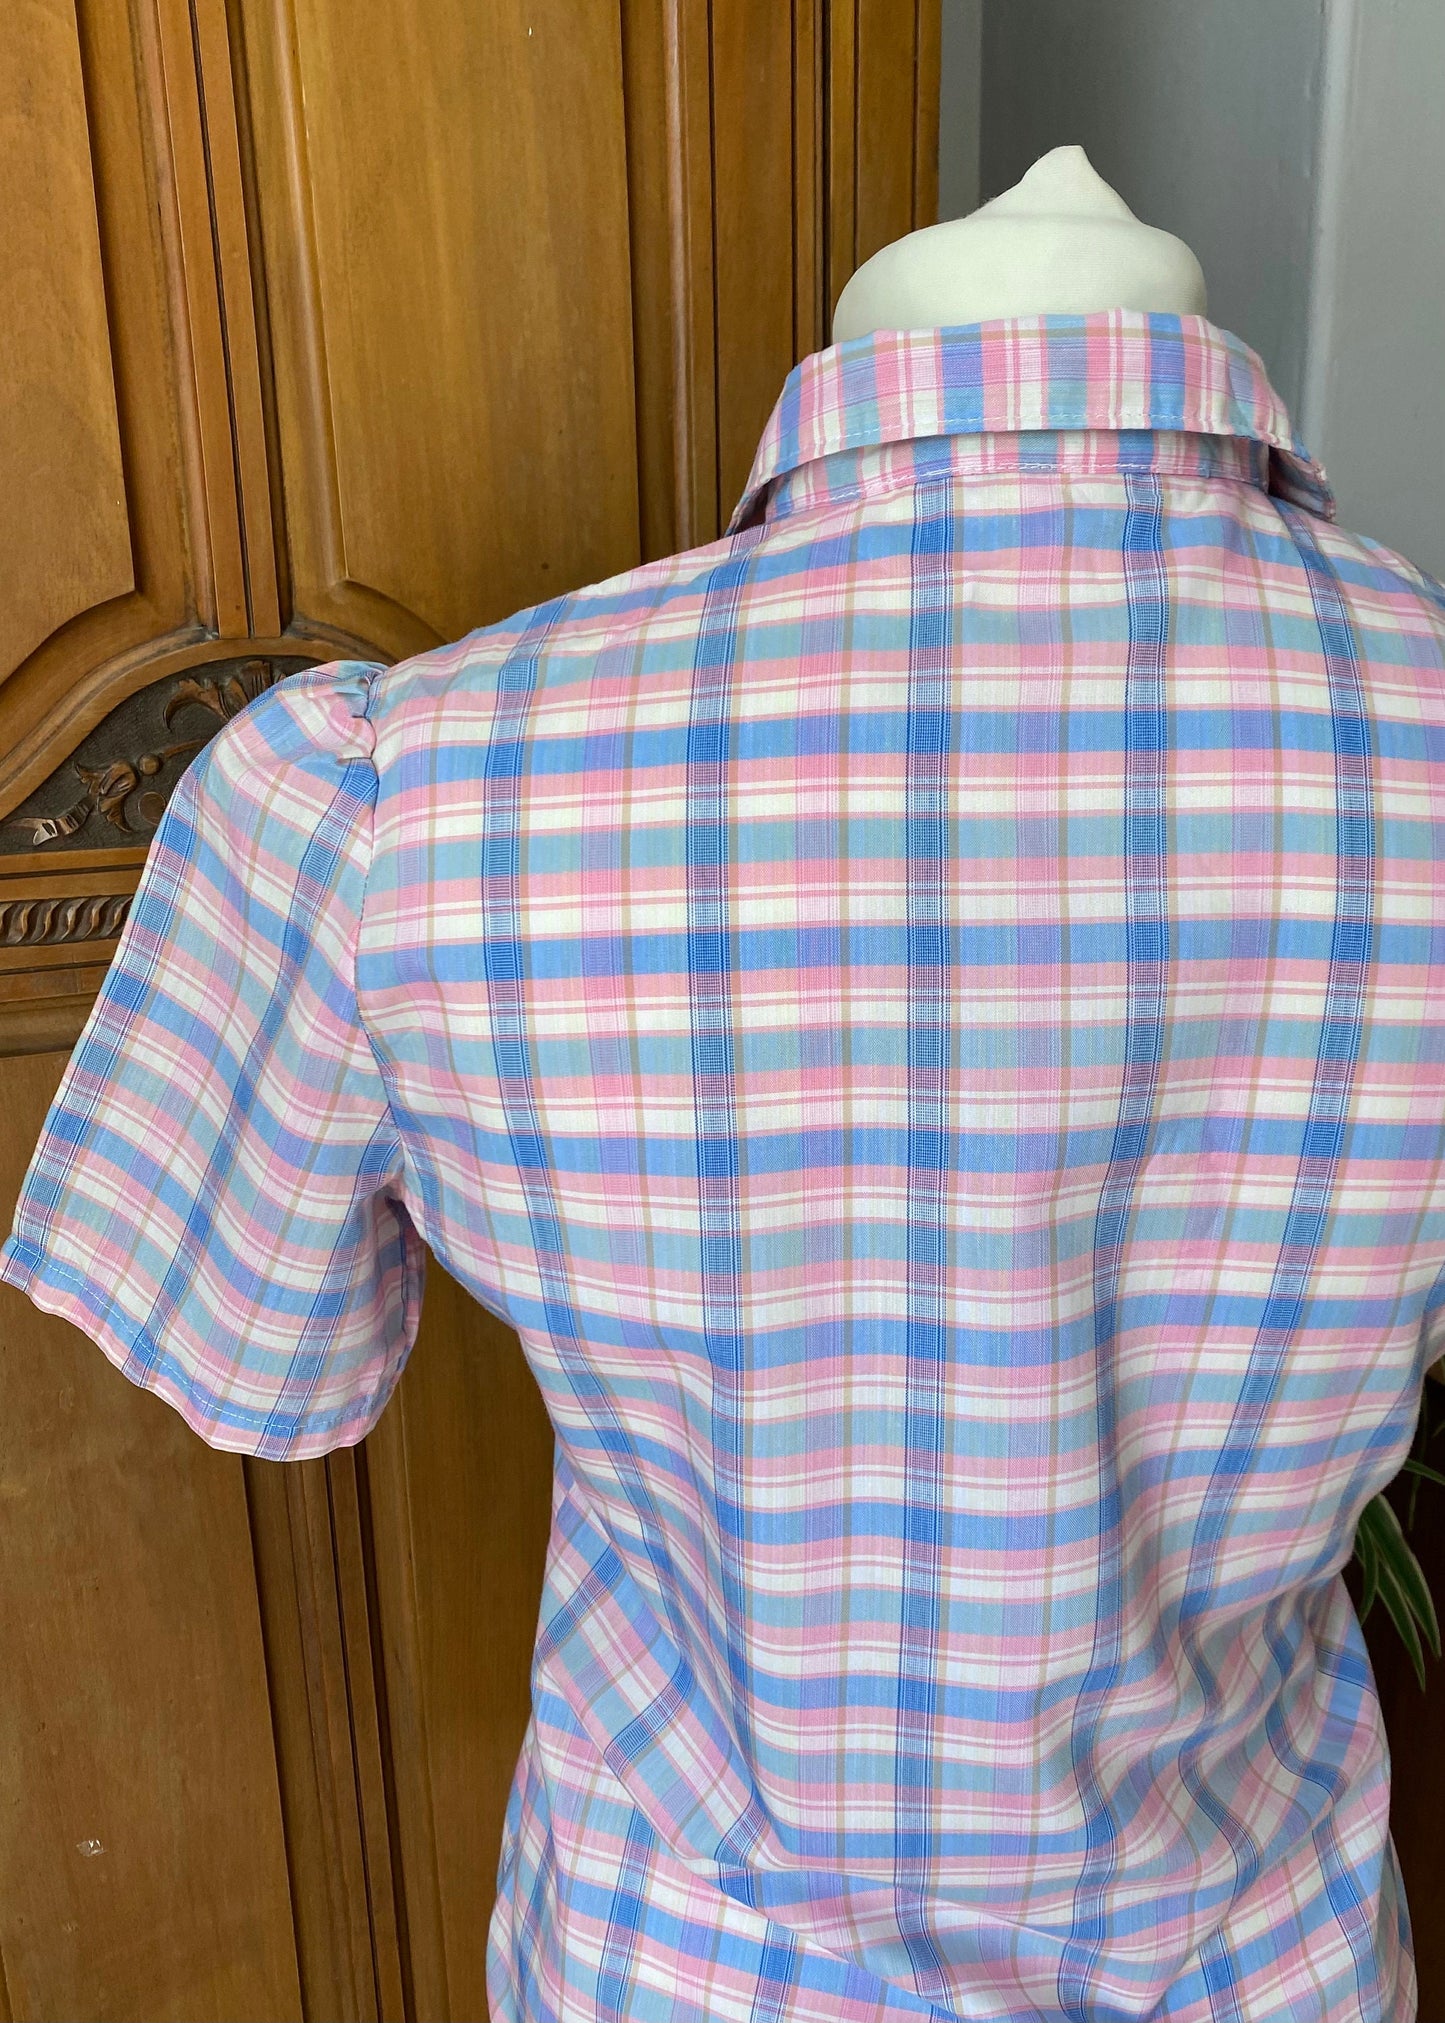 80s pink, white and blue checked blouse with Peter Pan collar. Approx U.K. size 12-14